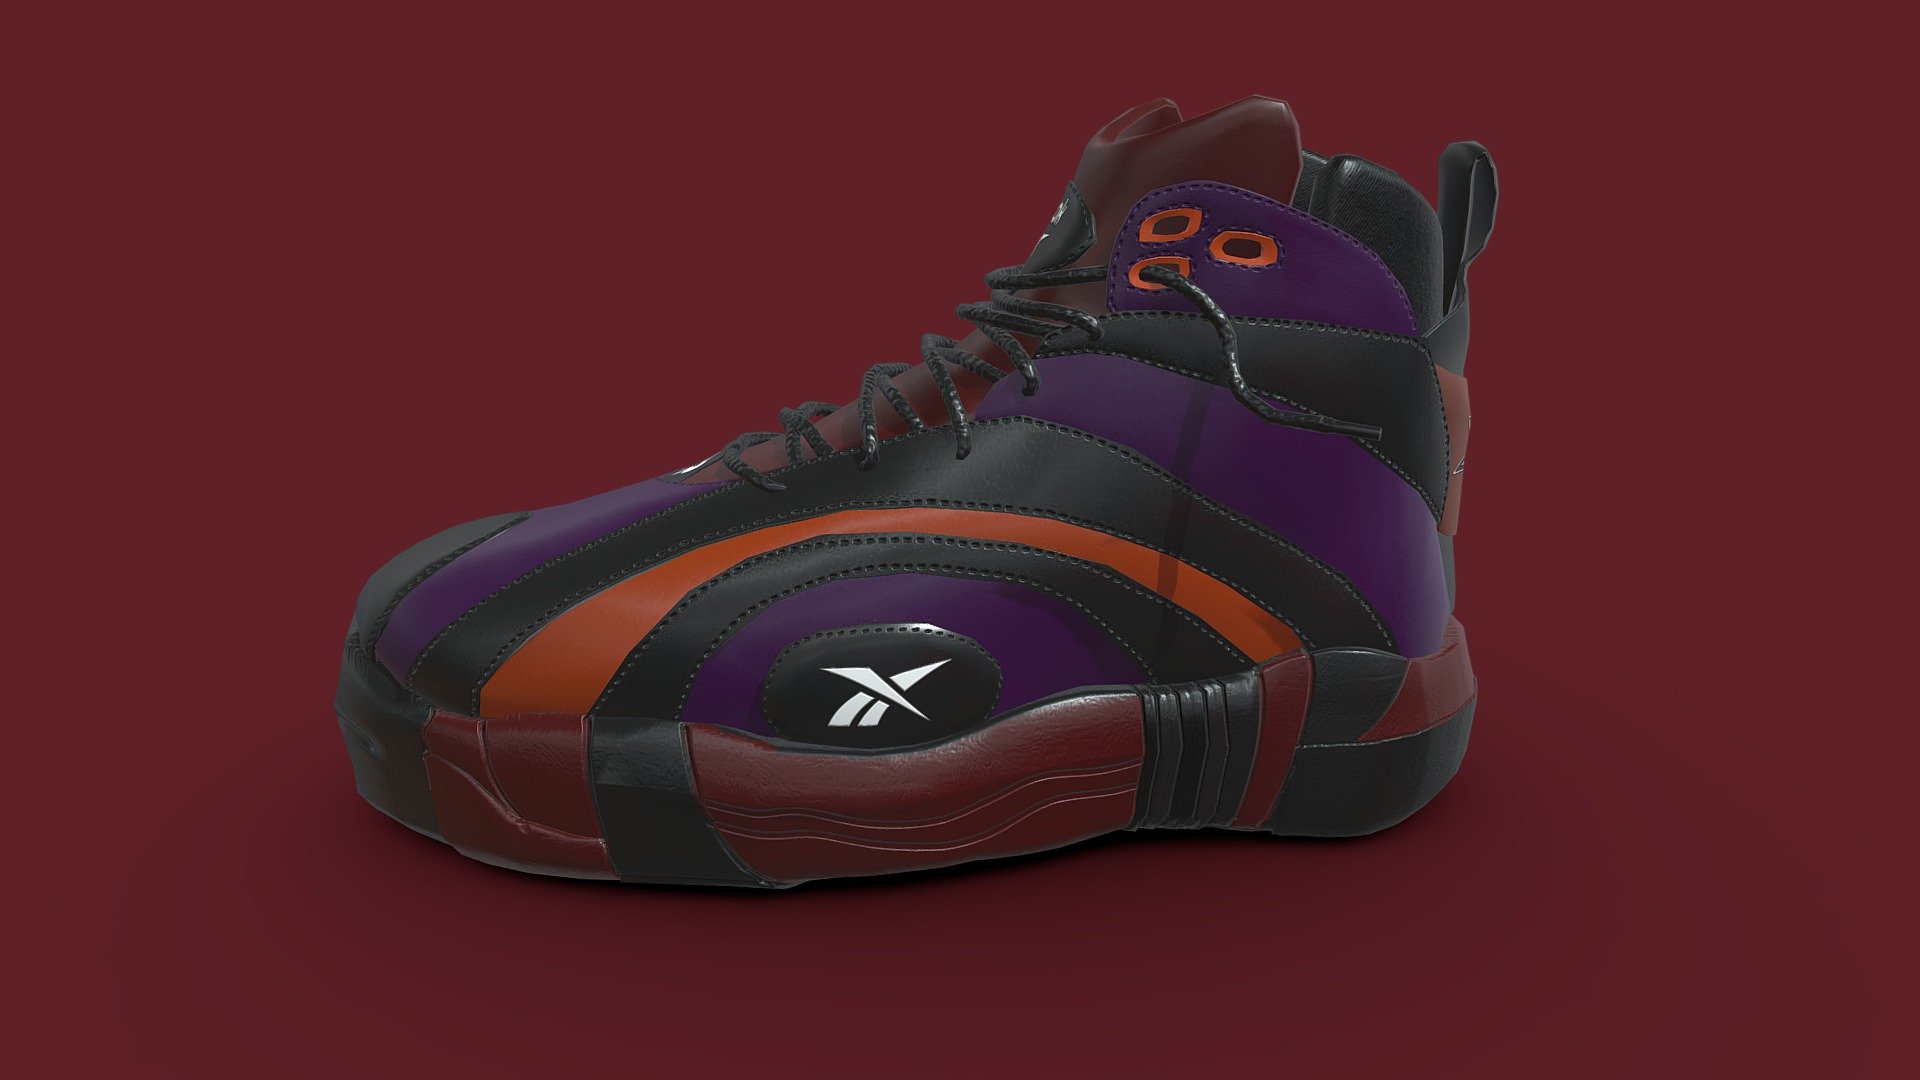 Another sneaker model this time made one of my favorite sneakers the Shaqnosis got a pair a while ago and one of the most comfortable shoes i own 3d model